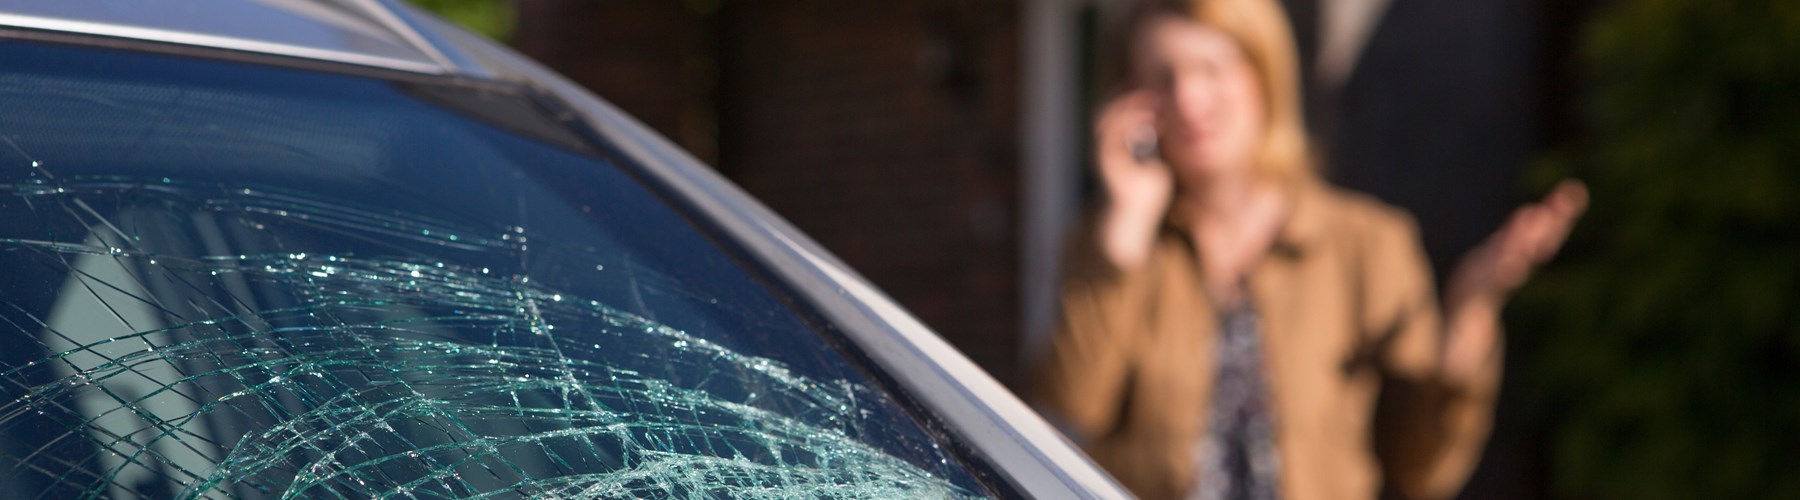 https://www.rias.co.uk/globalassets/rias/assets/new-and-guides/tips-and-guides/broken-car-windscreen-and-woman-on-the-phone-in-the-background.jpg?w=1800&h=500&mode=crop